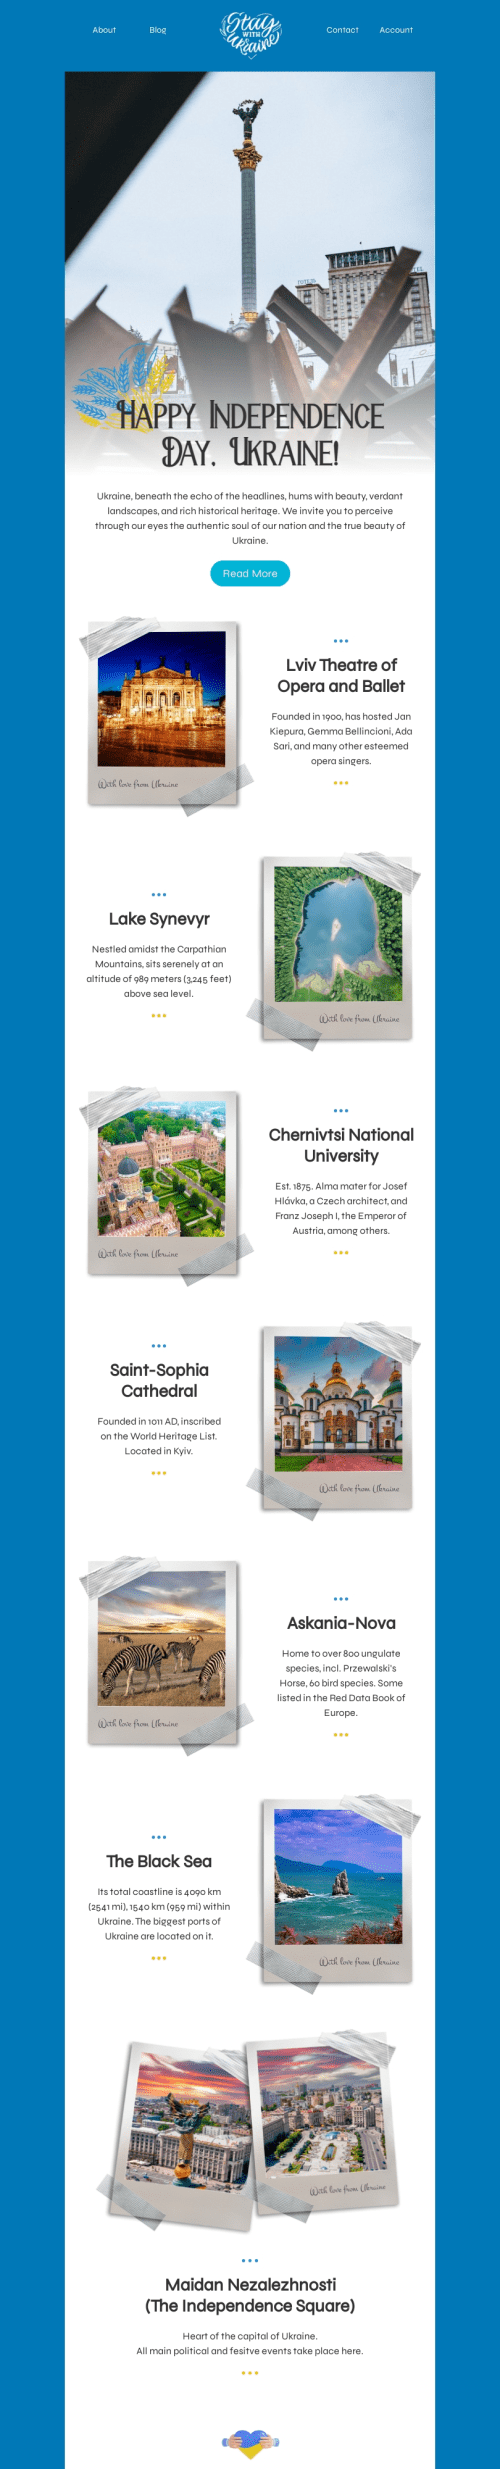 Independence Day of Ukraine email template "Landmarks of Ukraine" for nonprofit industry desktop view